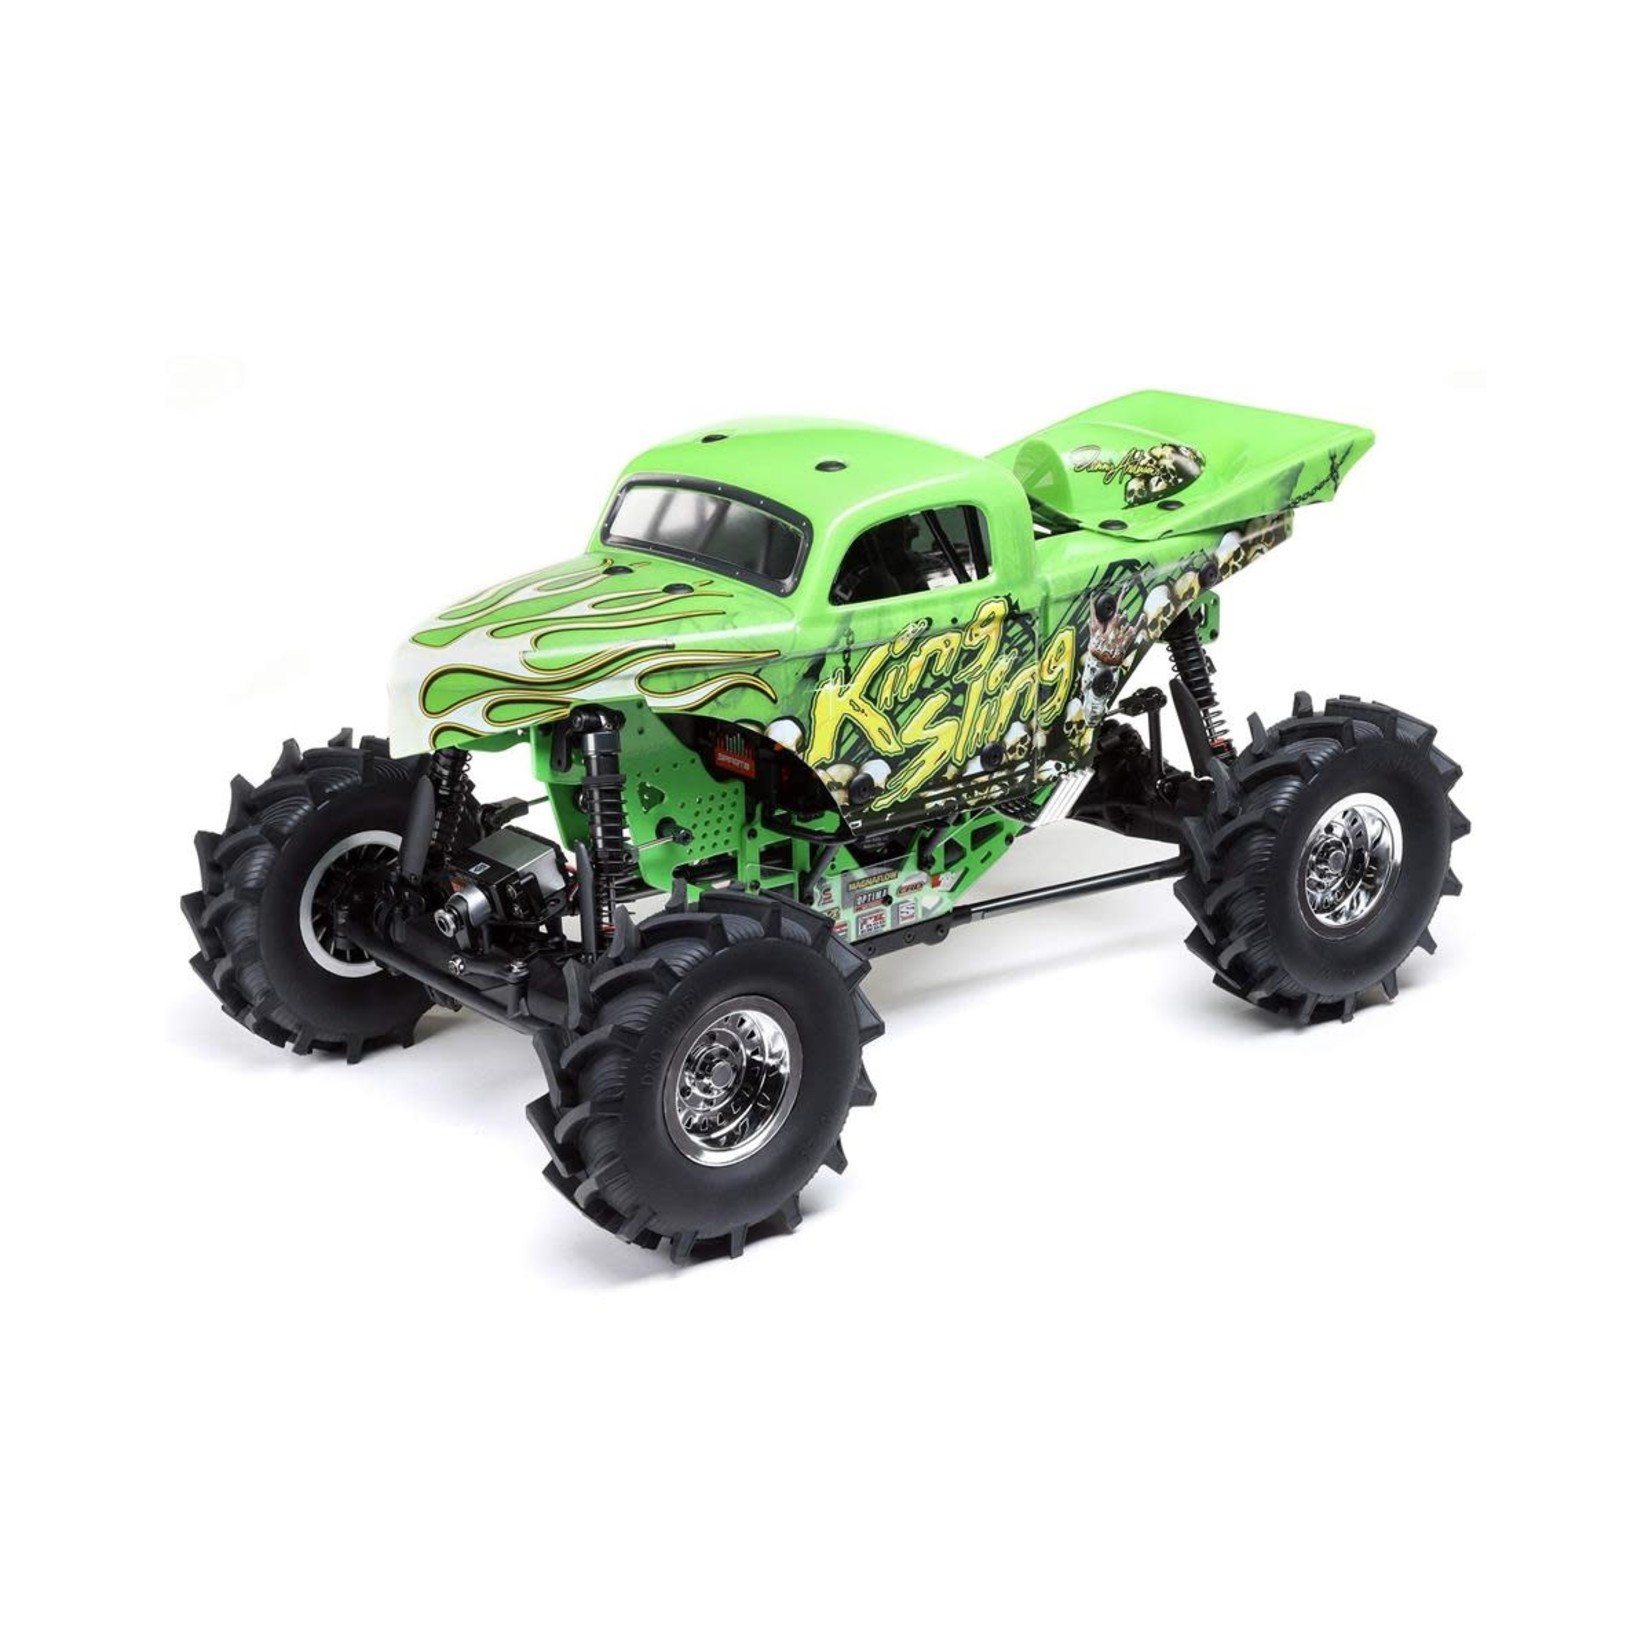 Losi Losi LMT King Sling RTR 1/10 4WD Solid Axle Mega Truck w/DX3 2.4GHz Radio #LOS04024T1